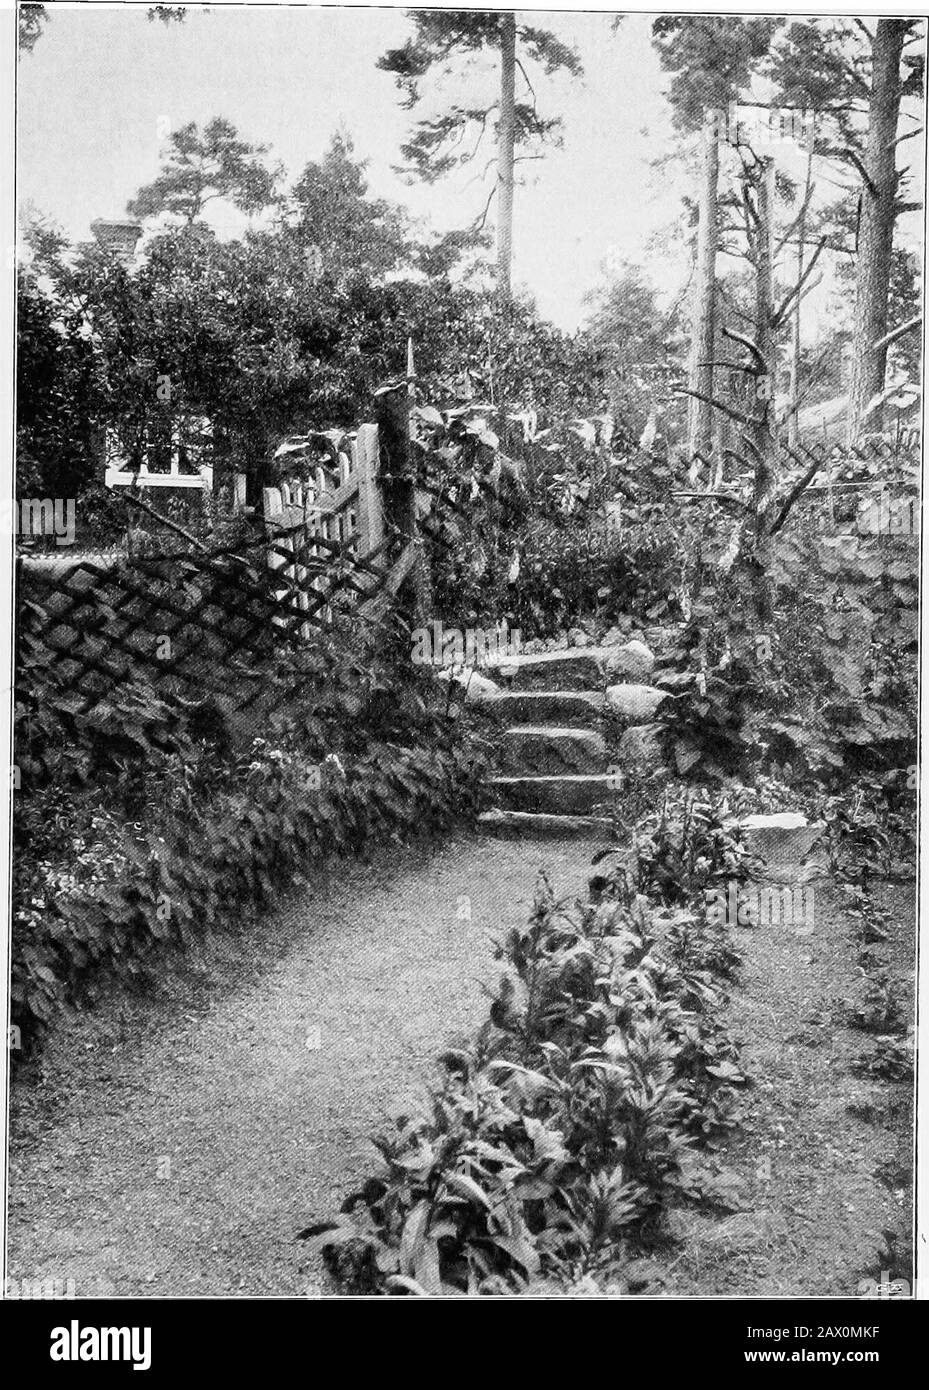 The garden that we made . entrancmg- O Digitized by IVIicro^hft® Other GardensI Have Planned. In the Third Garden : A Corner with Steps and a Gate. 55 Digitized by IVIicrosoft® The Gardenthat We Made 1 ^^^^^^Bww^ ^ ... ? •, * ? i 1 &gt;&gt; ^4K^W^i^5vM a/m , -.4vS«;^tSJi*u5 Hi &gt;wr 4.. -^ ^-? r-ffir^ ? ^^^-^^^ii^^ ^P A background of Fox-gloves. of daffodils ; later on there are calendula. Theirglowing yellow against the grey granite is one ofthe most glorious sights imaginable. The long,narrow flower-beds are divided into squares, eachsquare being devoted to one kind of flower. Inthe centre, Stock Photo